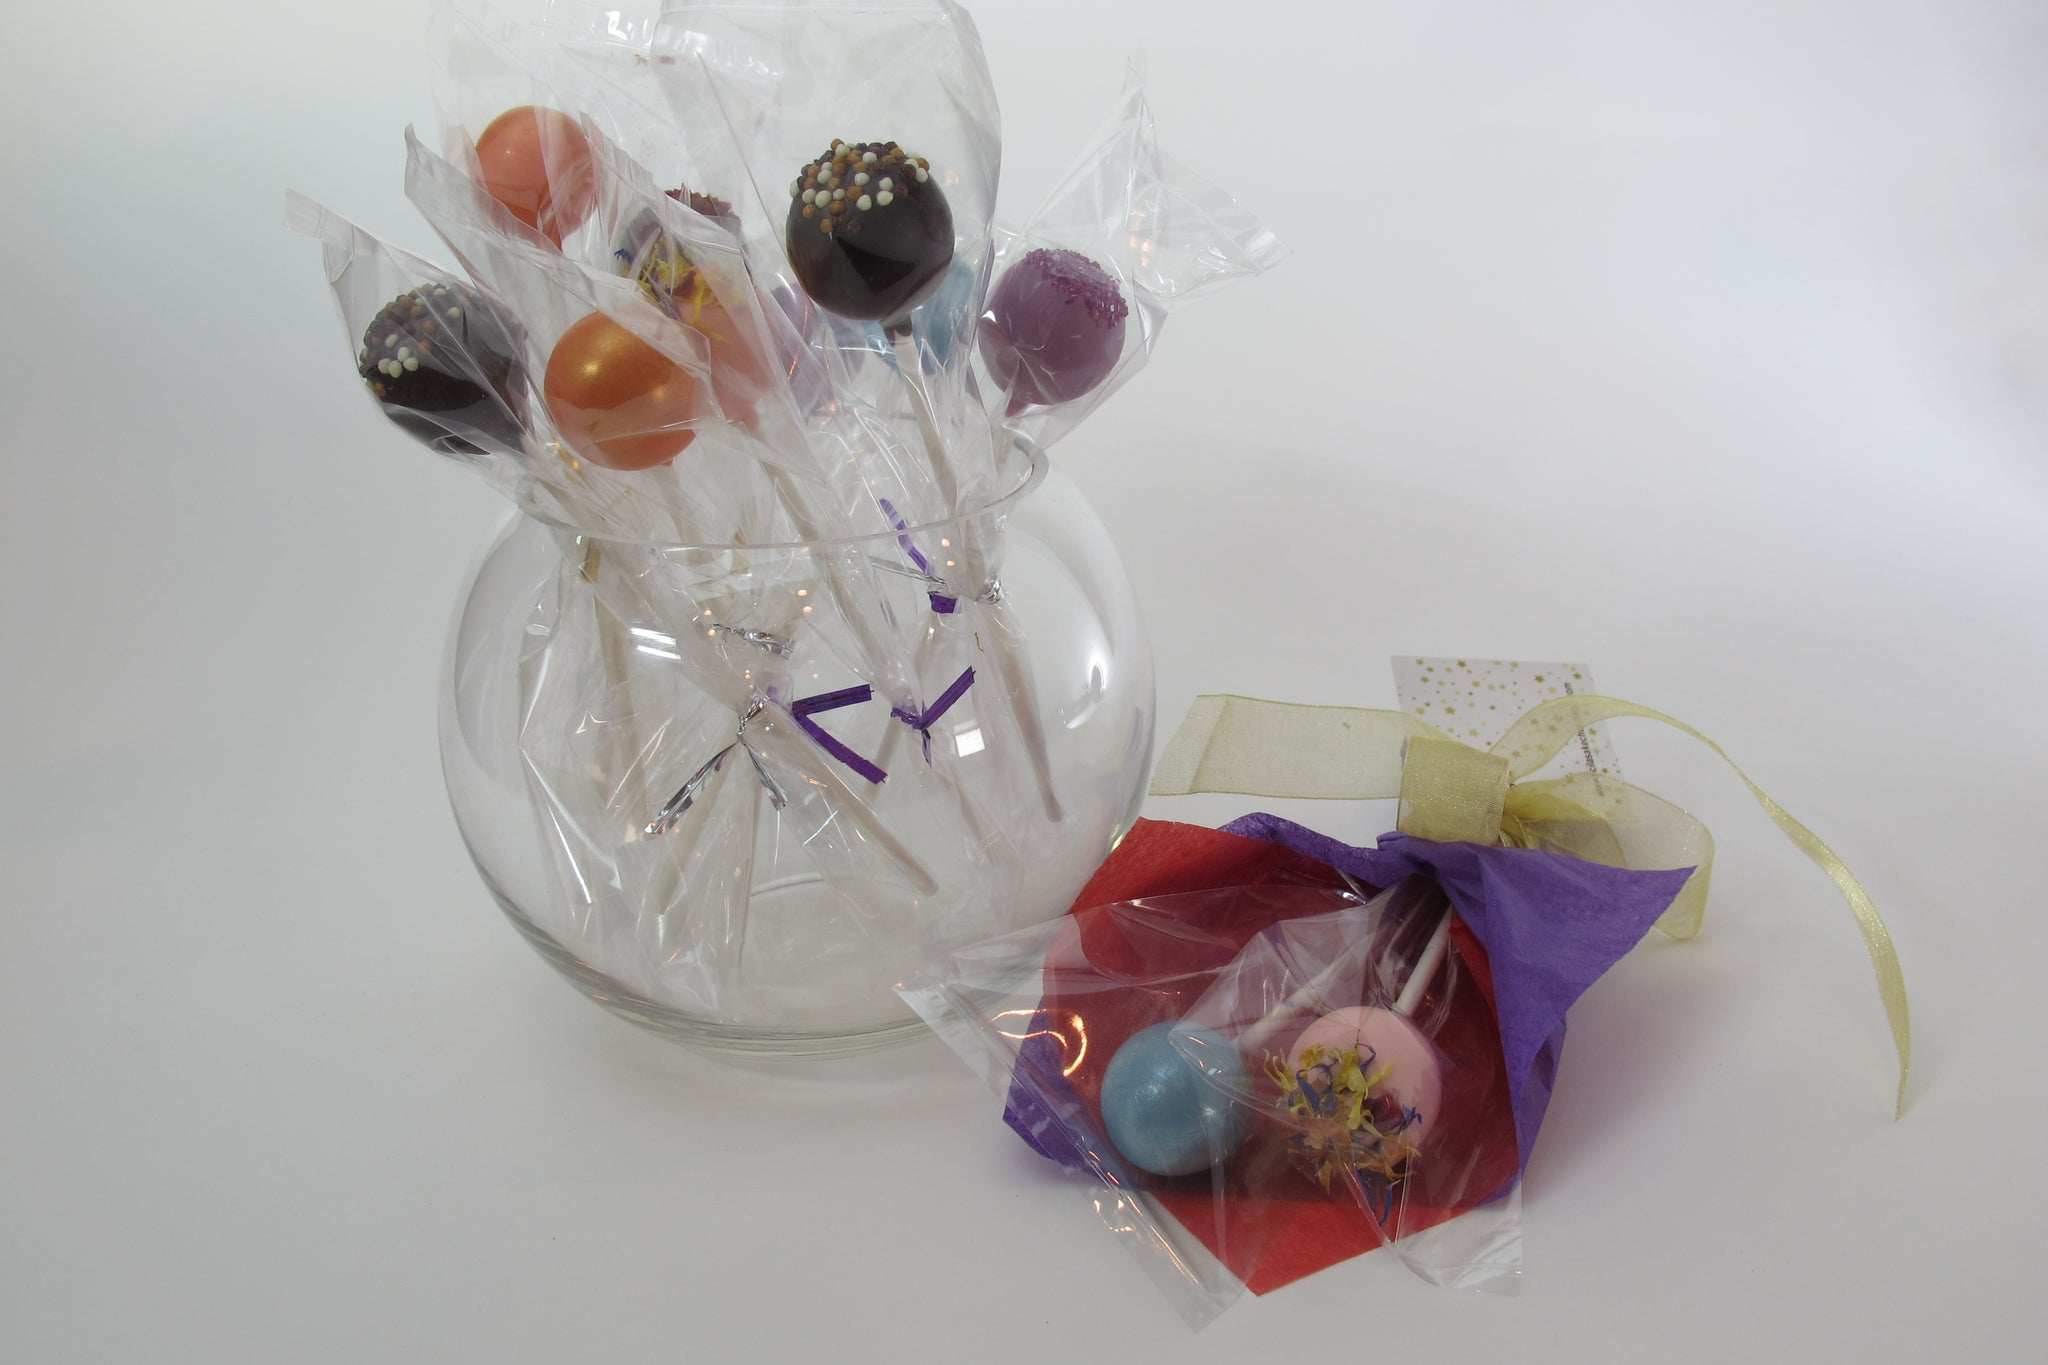 2 Single Stem Truffle Flower Bouquet & individually wrapped Truffle Flowers with various flavours